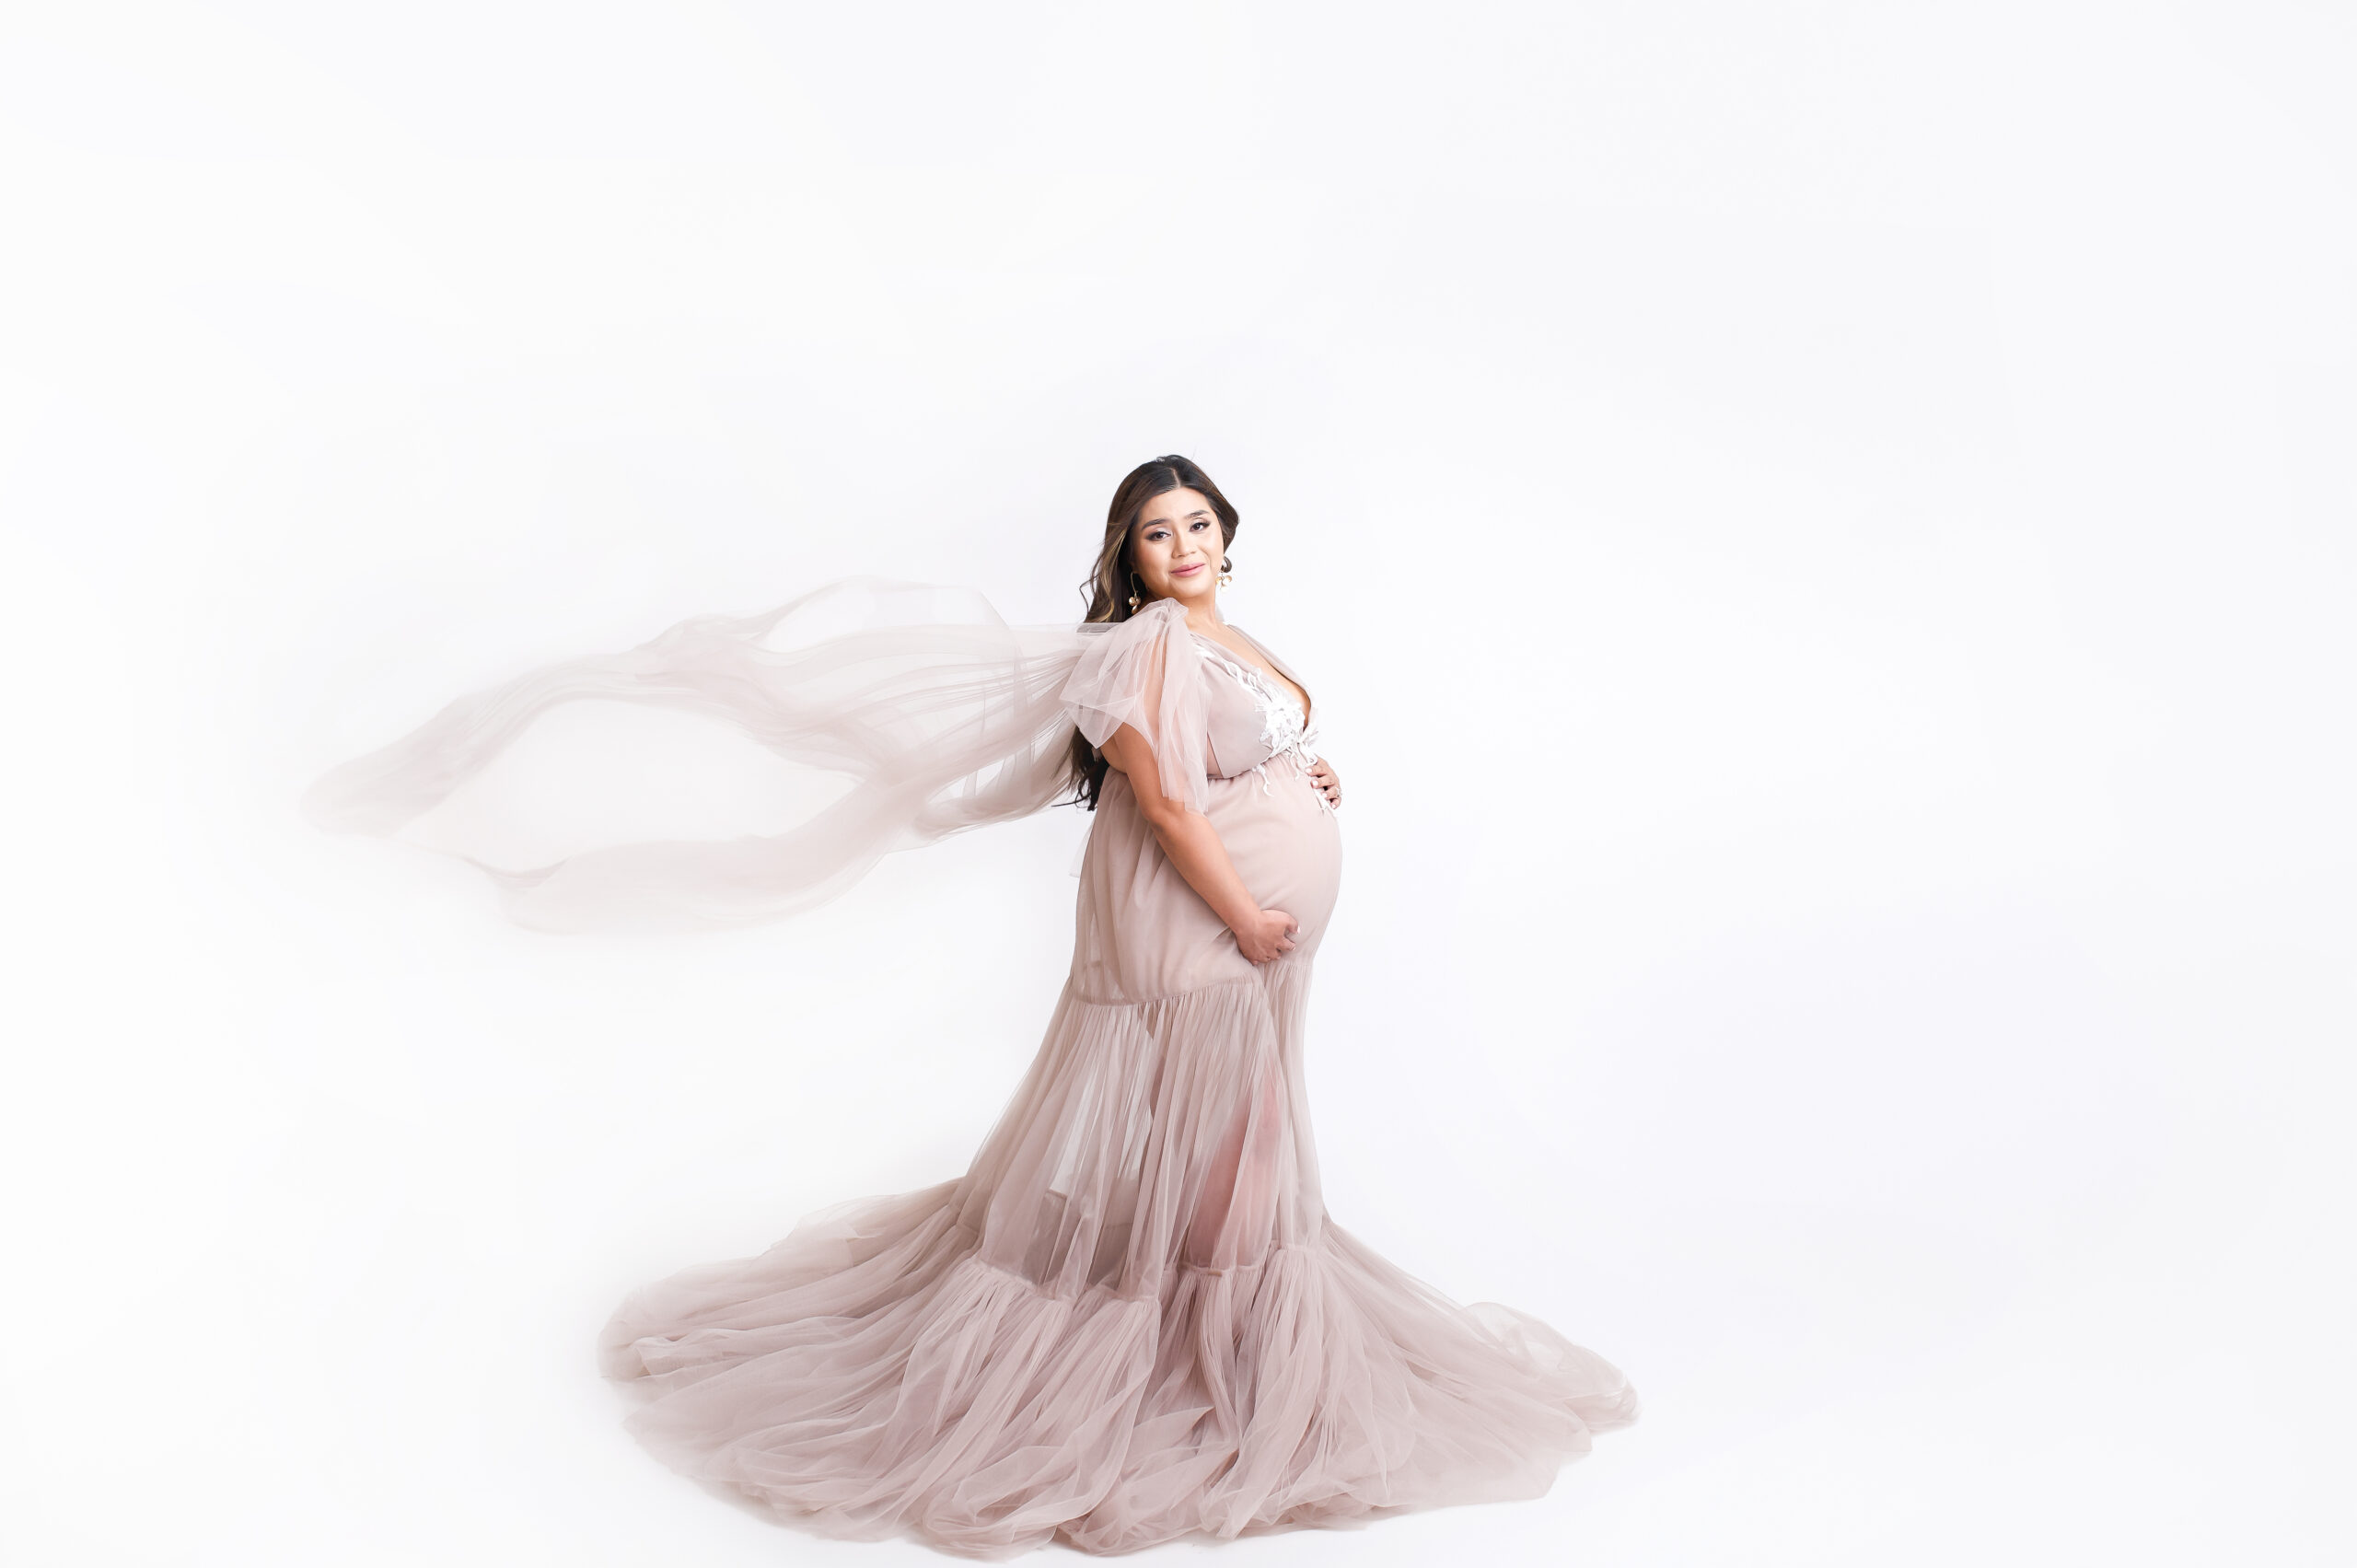 Get ready for your maternity session